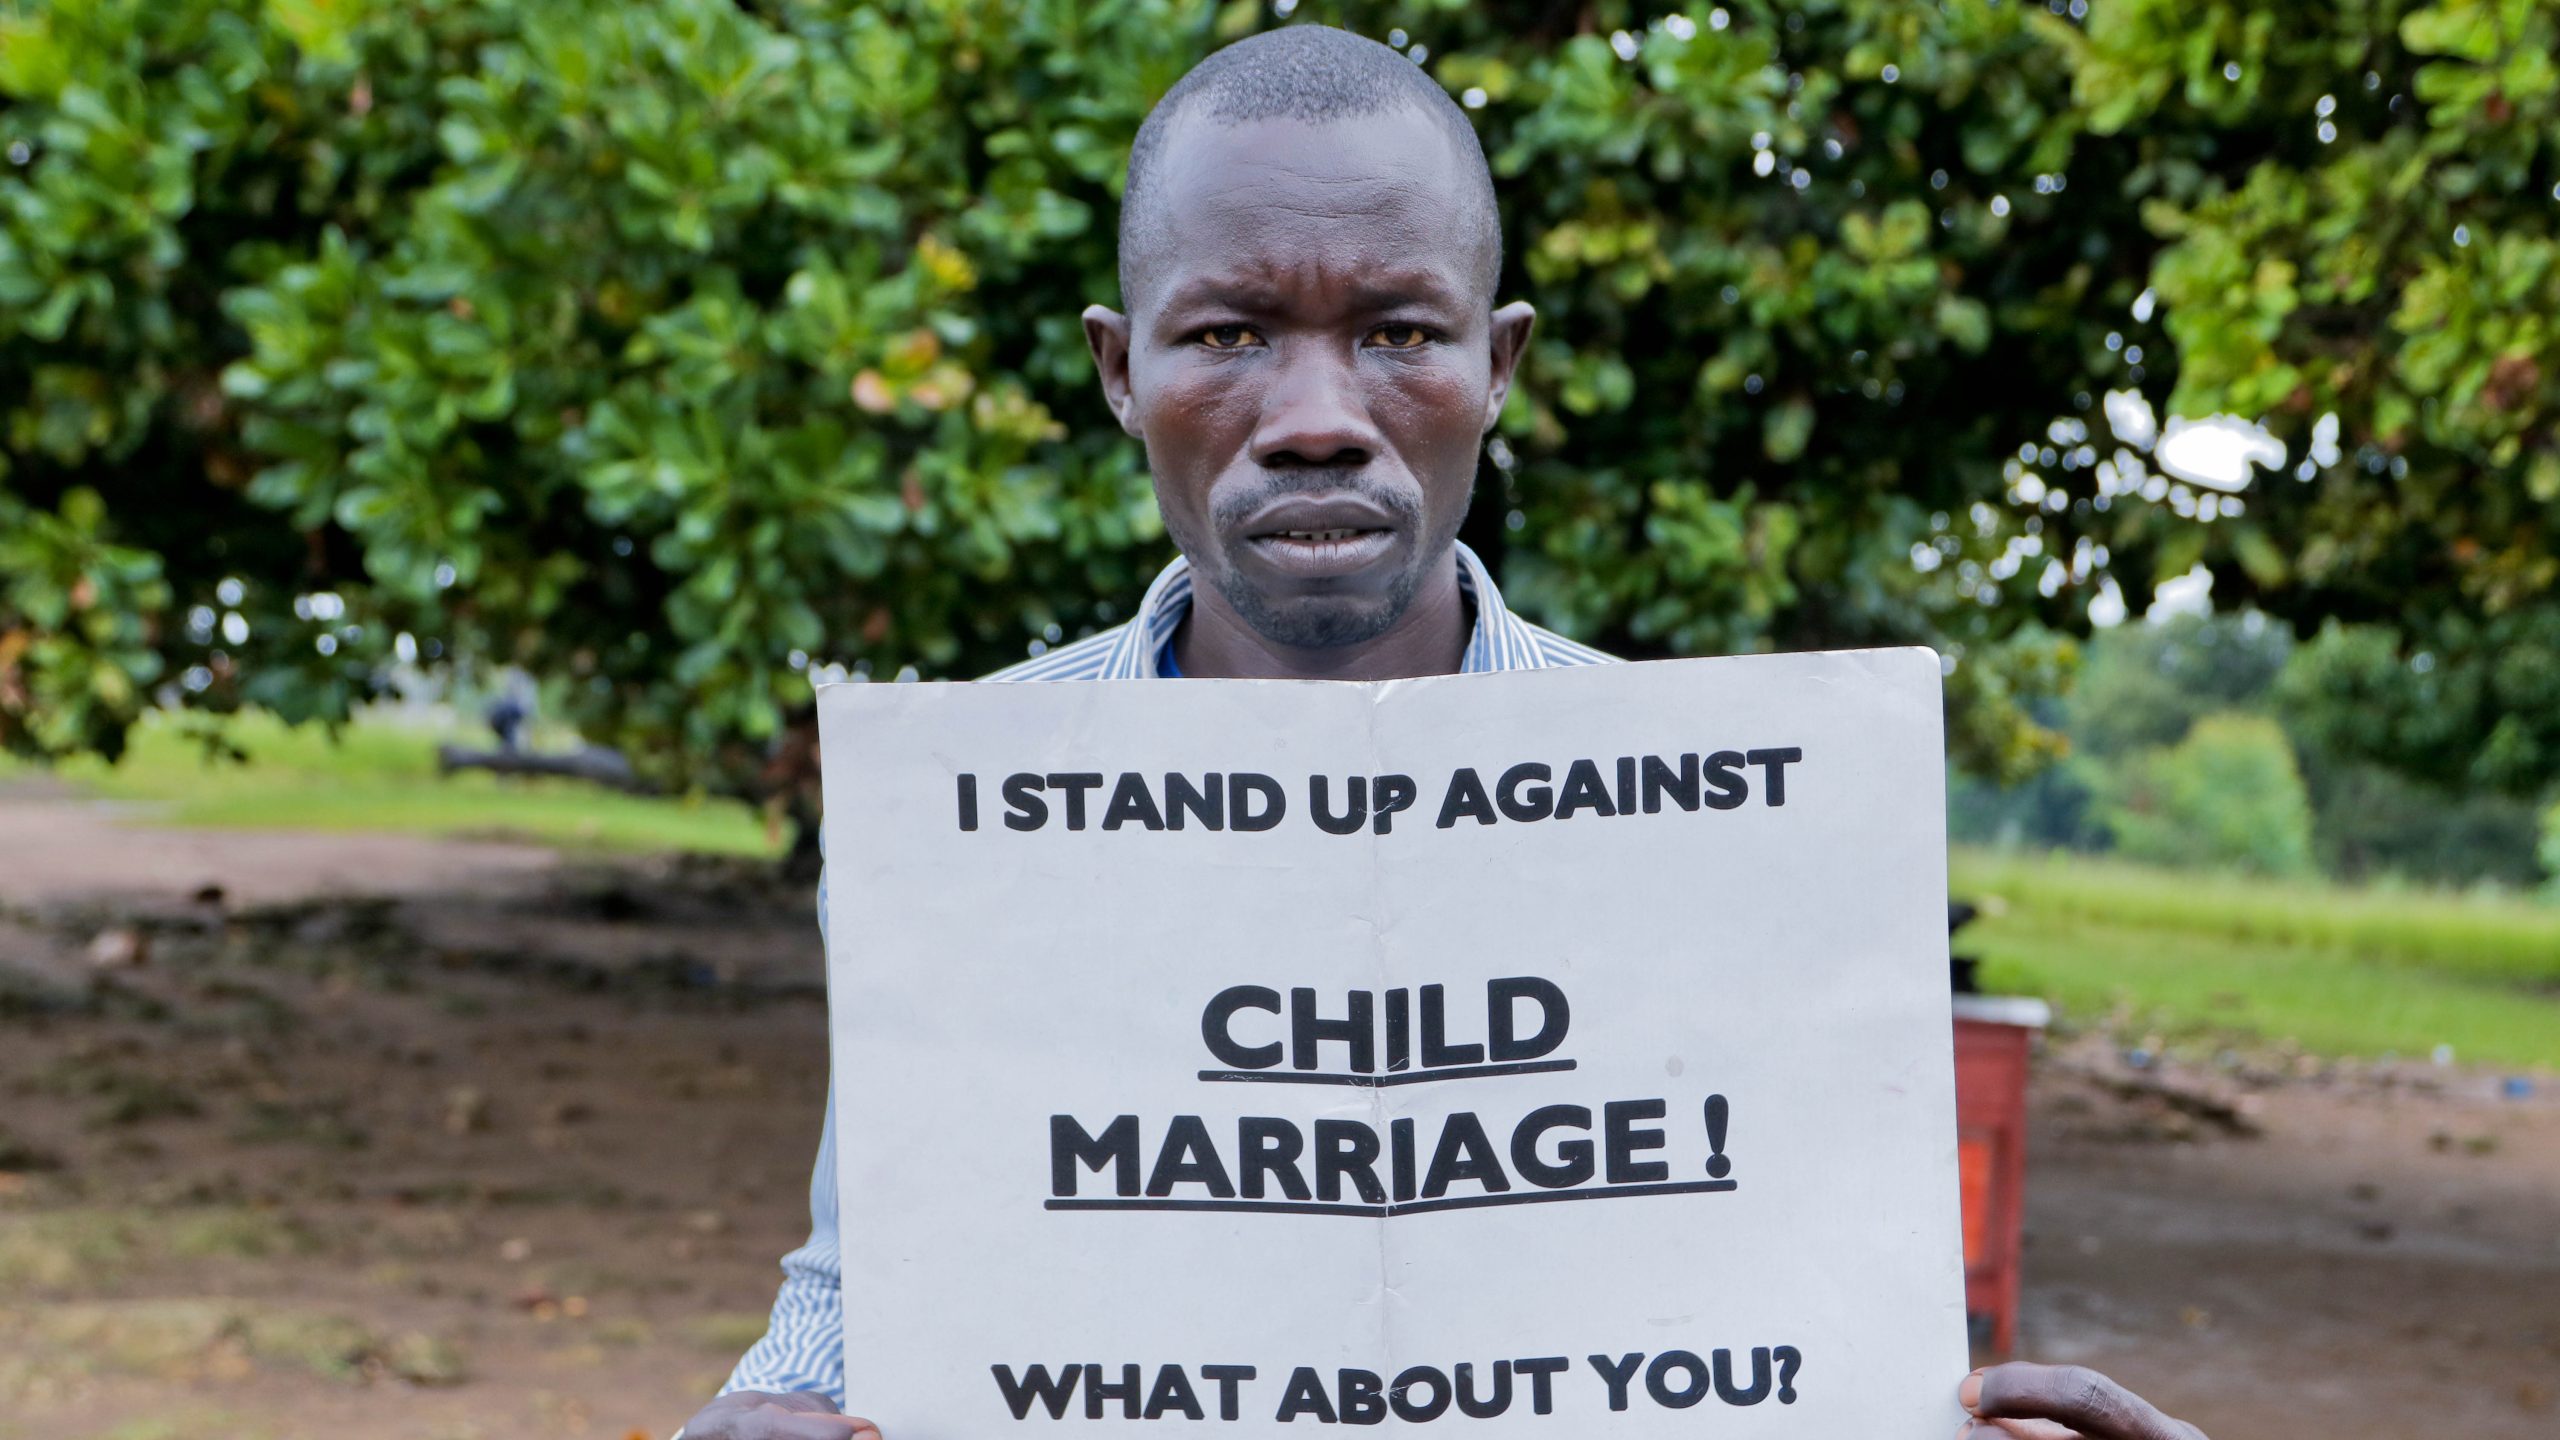 Amani Initiative campaign, I stand up with child marriage, what about you?